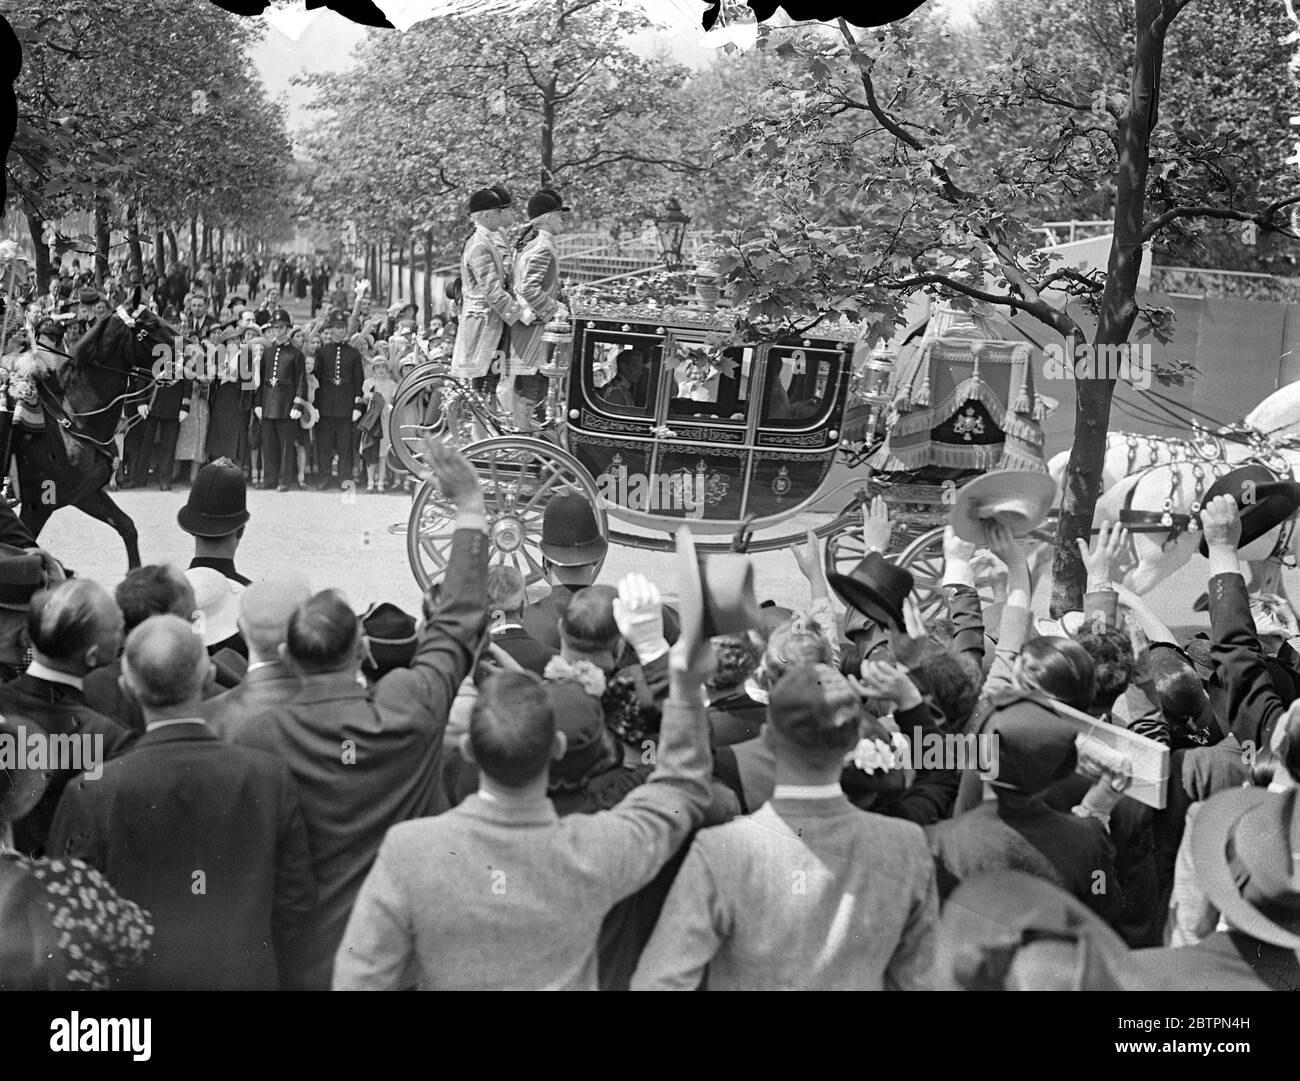 King returns after levee. The King returned in state from St James's Palace to Buckingham Palace after the levee. Photo shows, the King leaving St James's Palace. 28 May 1937 Stock Photo